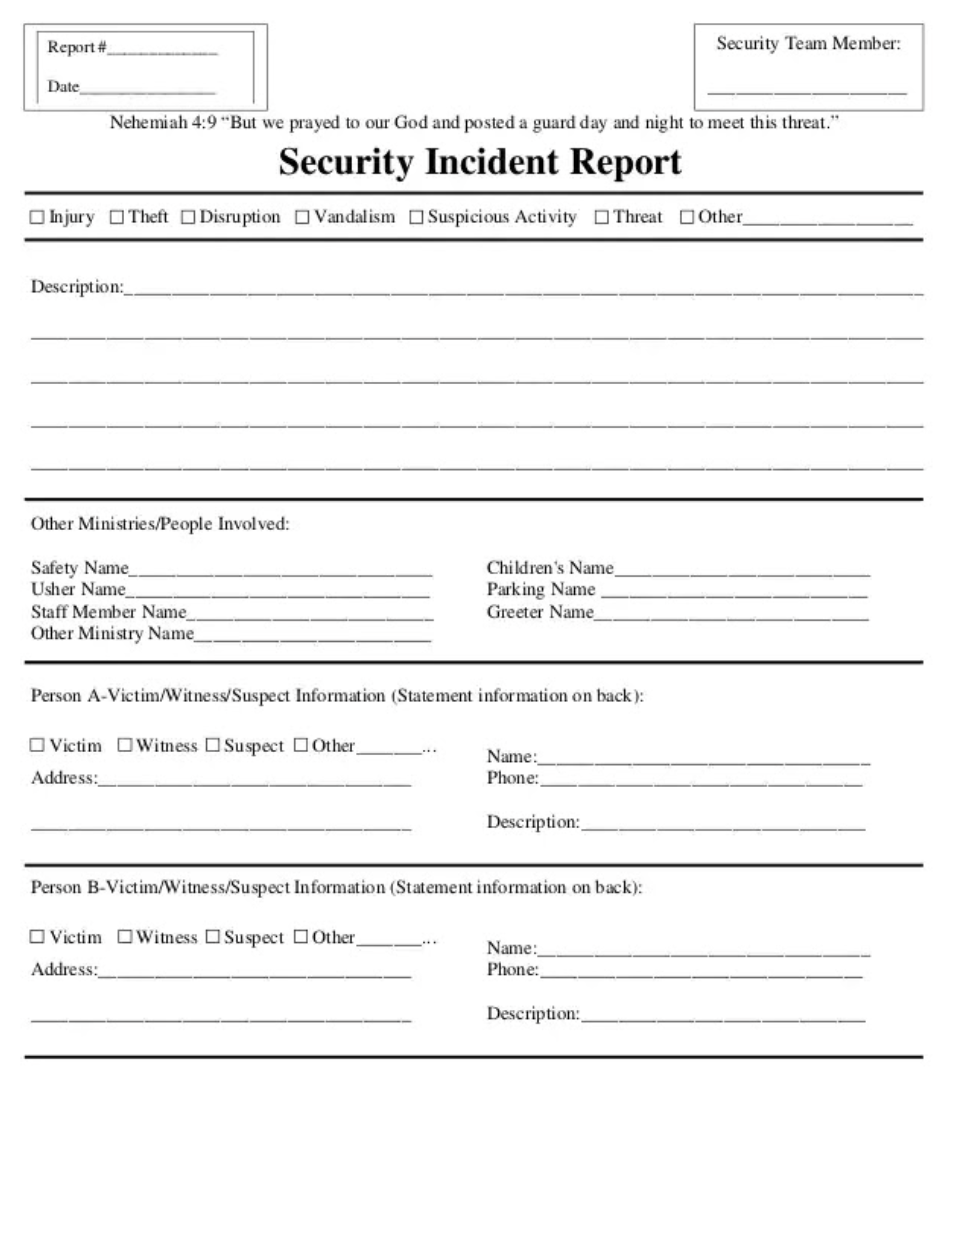 Automate Security Incident Report Document Processing In 10 Minutes! In Computer Incident Report Template